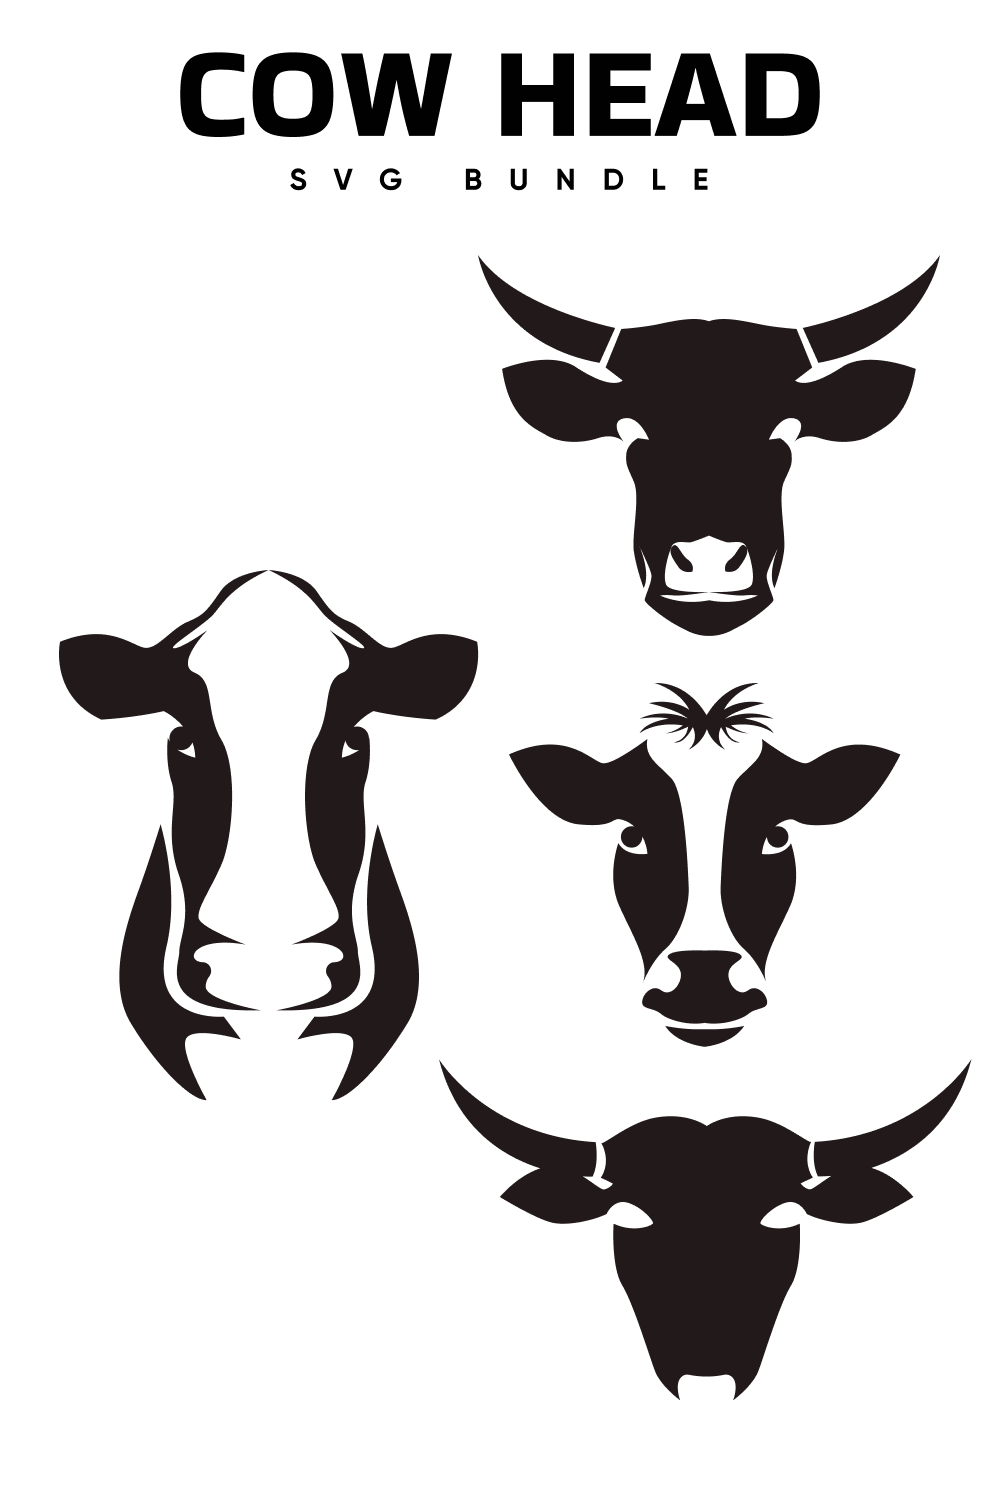 Big cow heads with big horns.